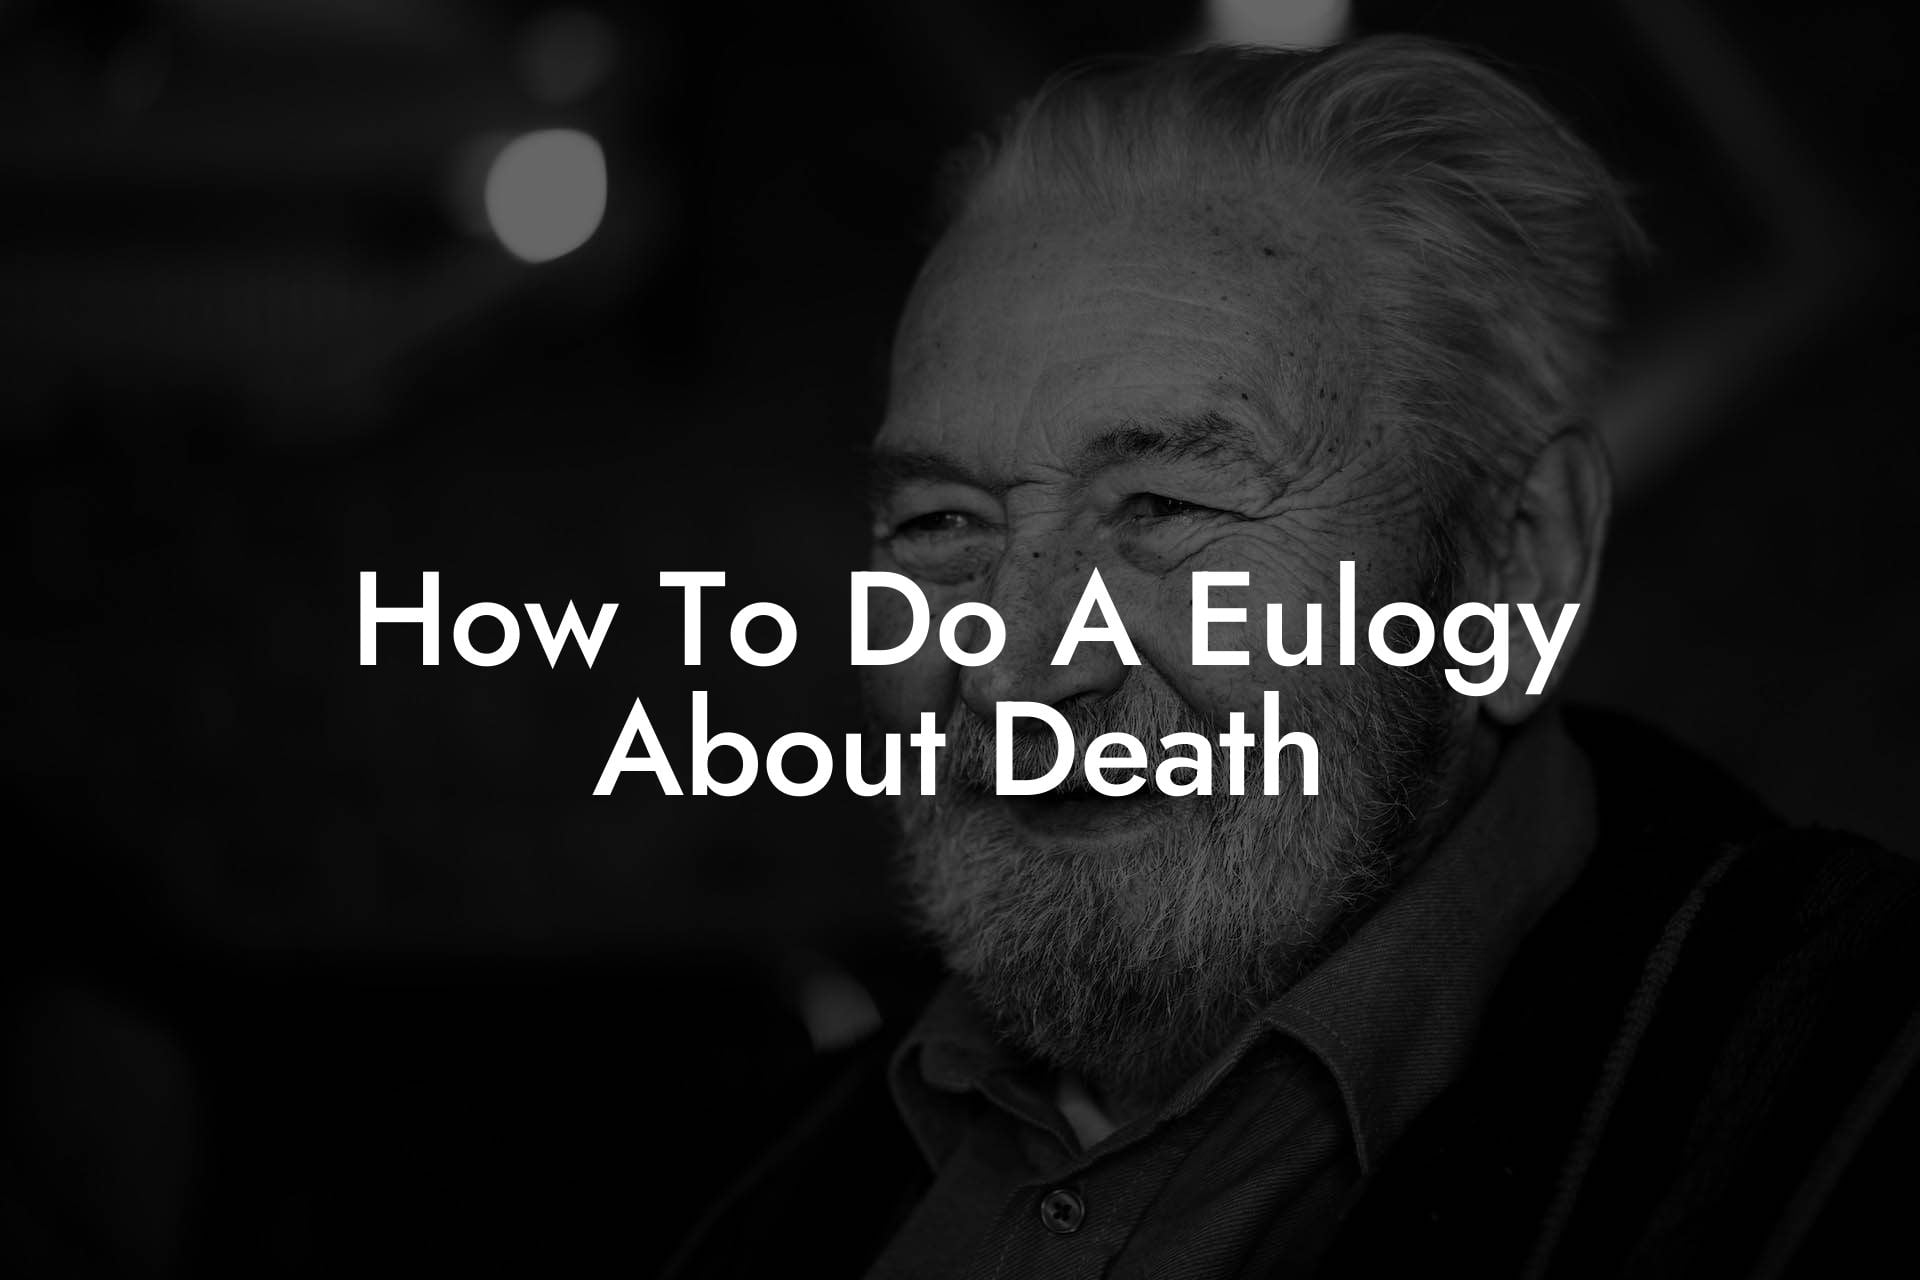 How To Do A Eulogy About Death